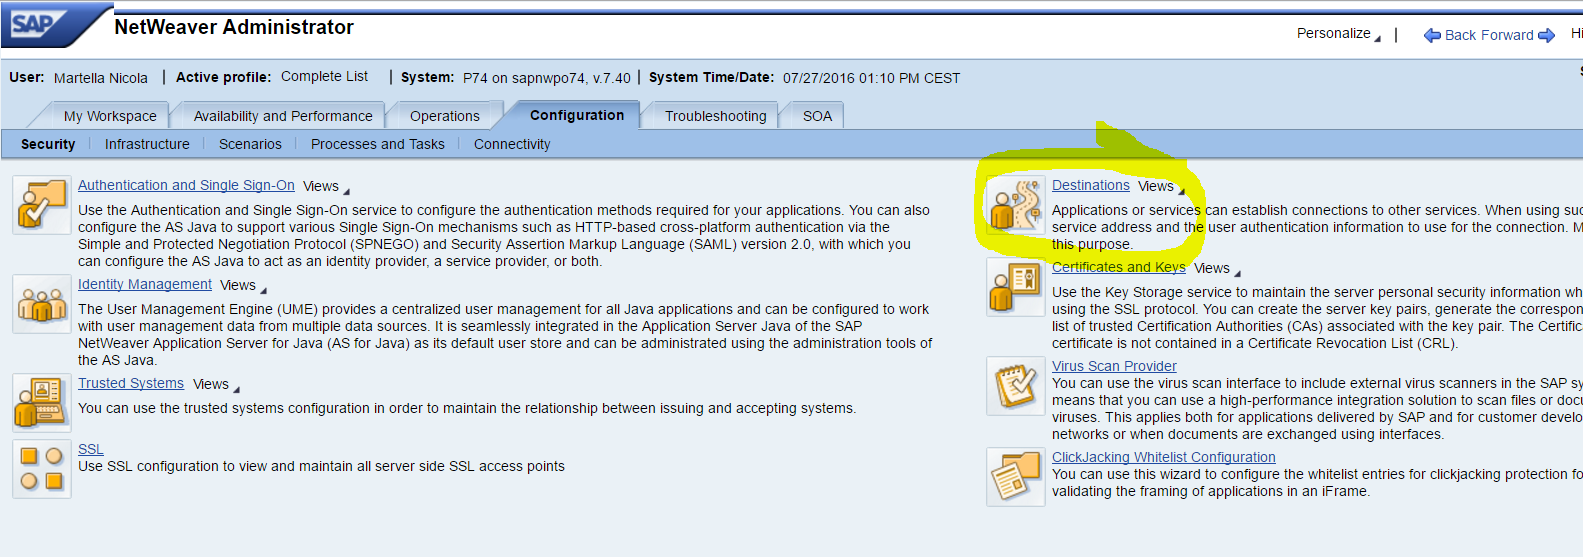 Netweaver Administration Configuration page